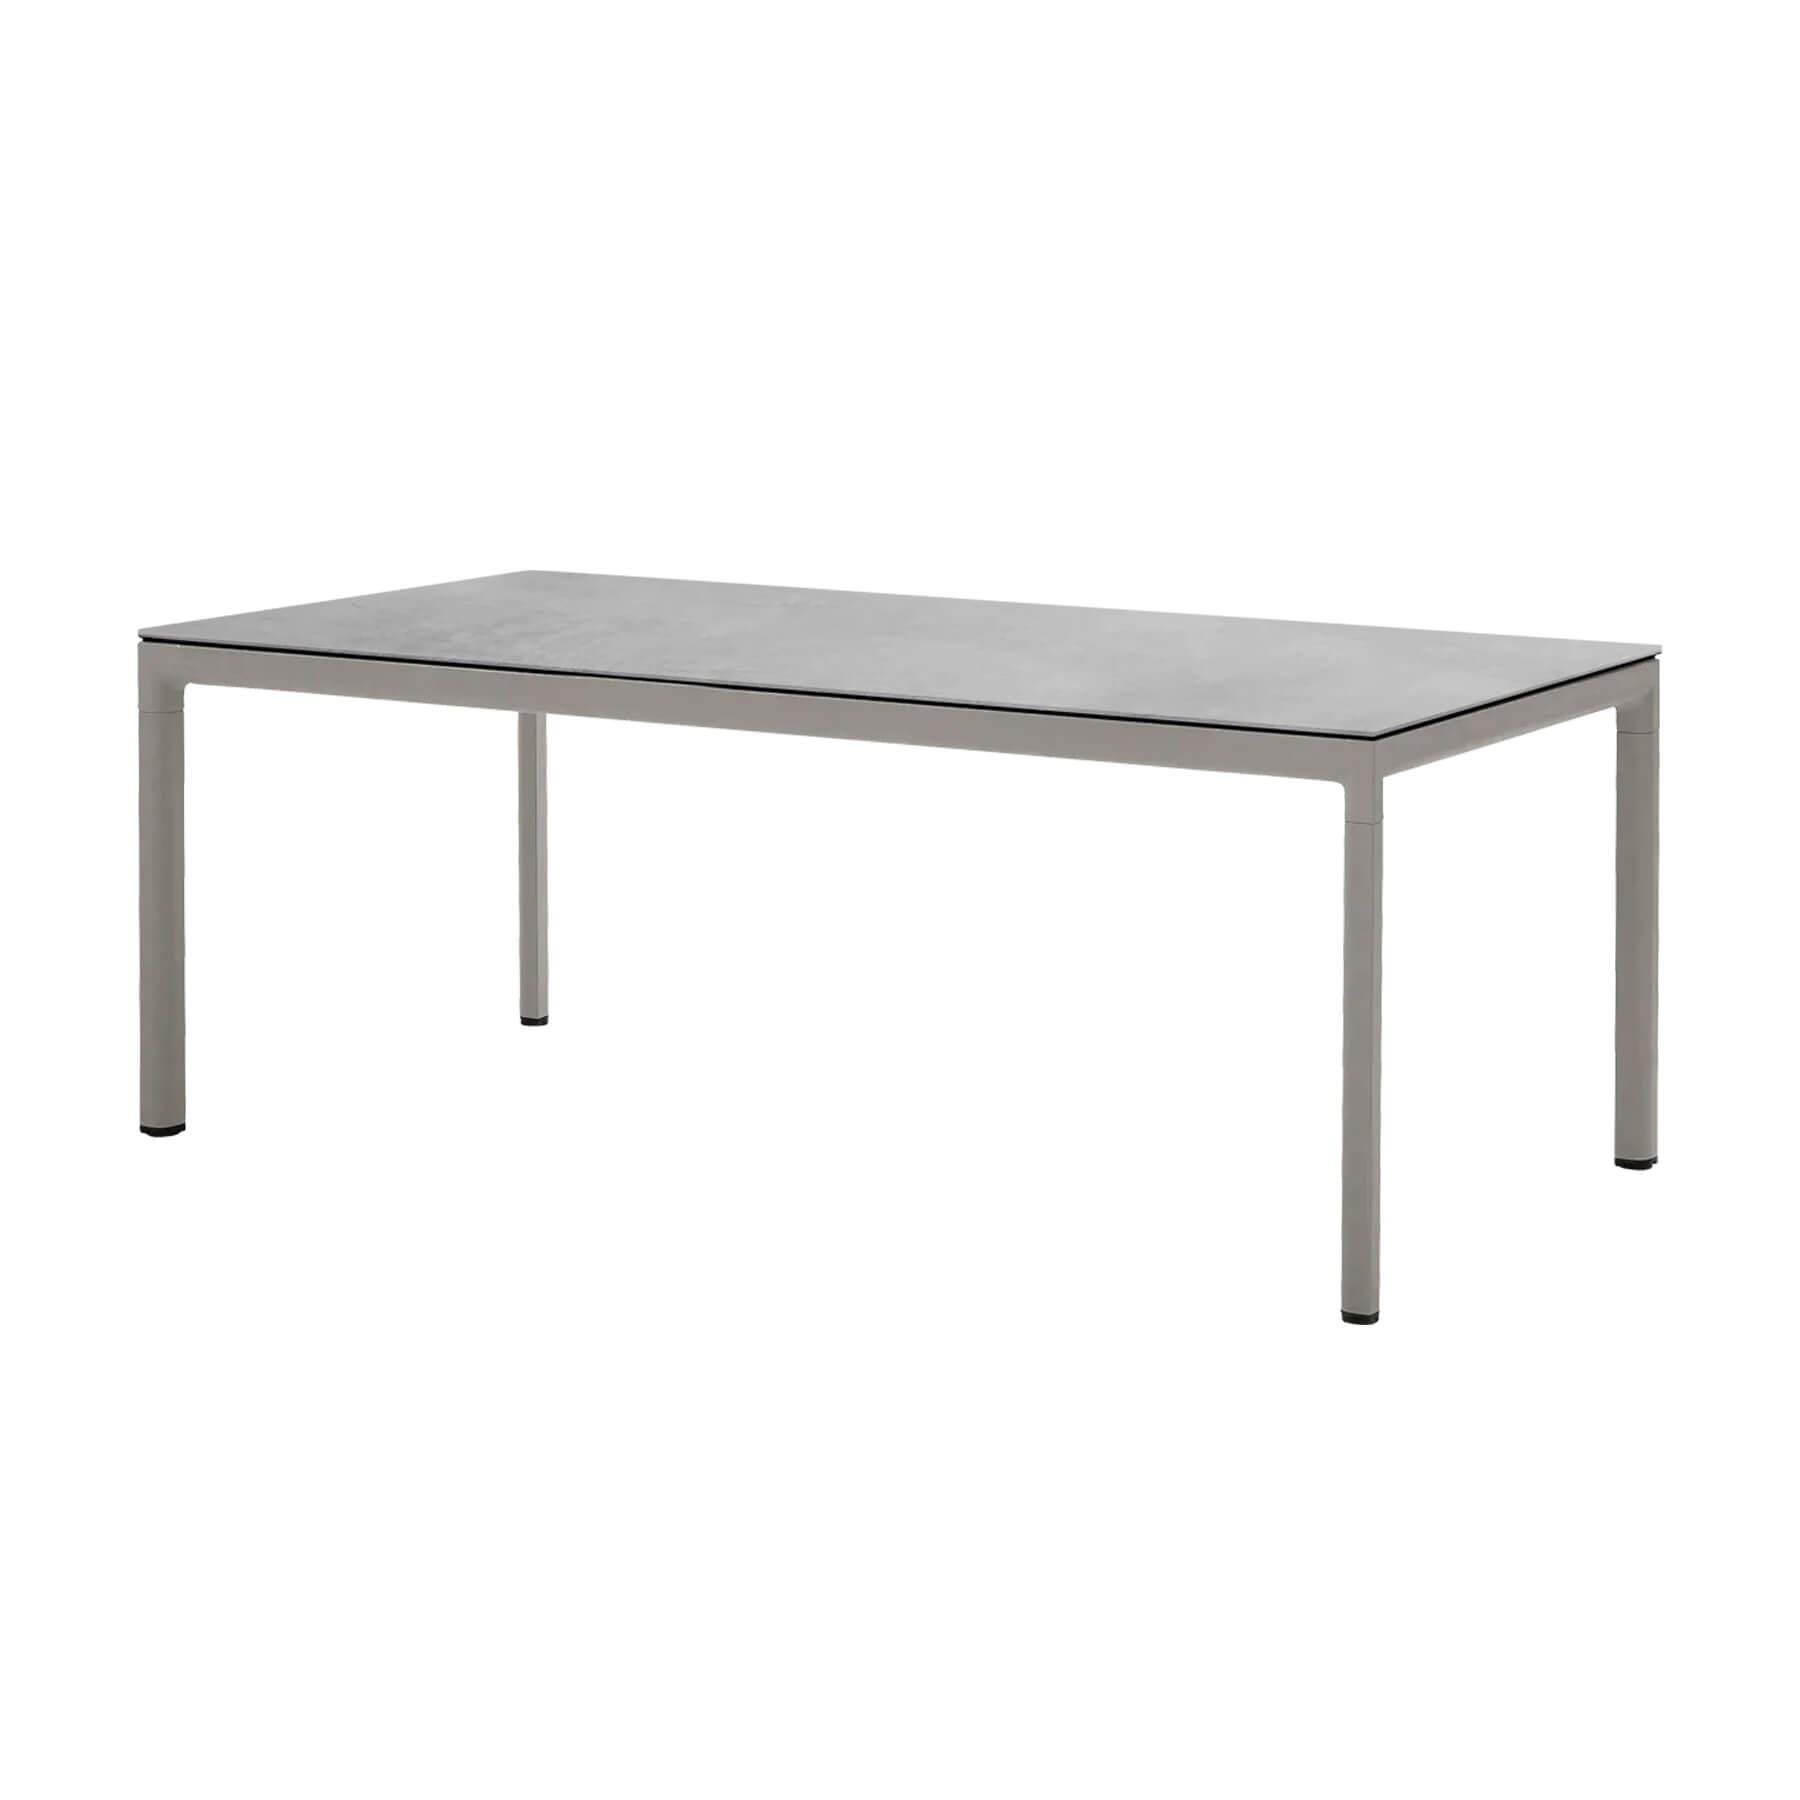 Caneline Drop Outdoor Dining Table Ceramic Fossil Grey Top Taupe Legs